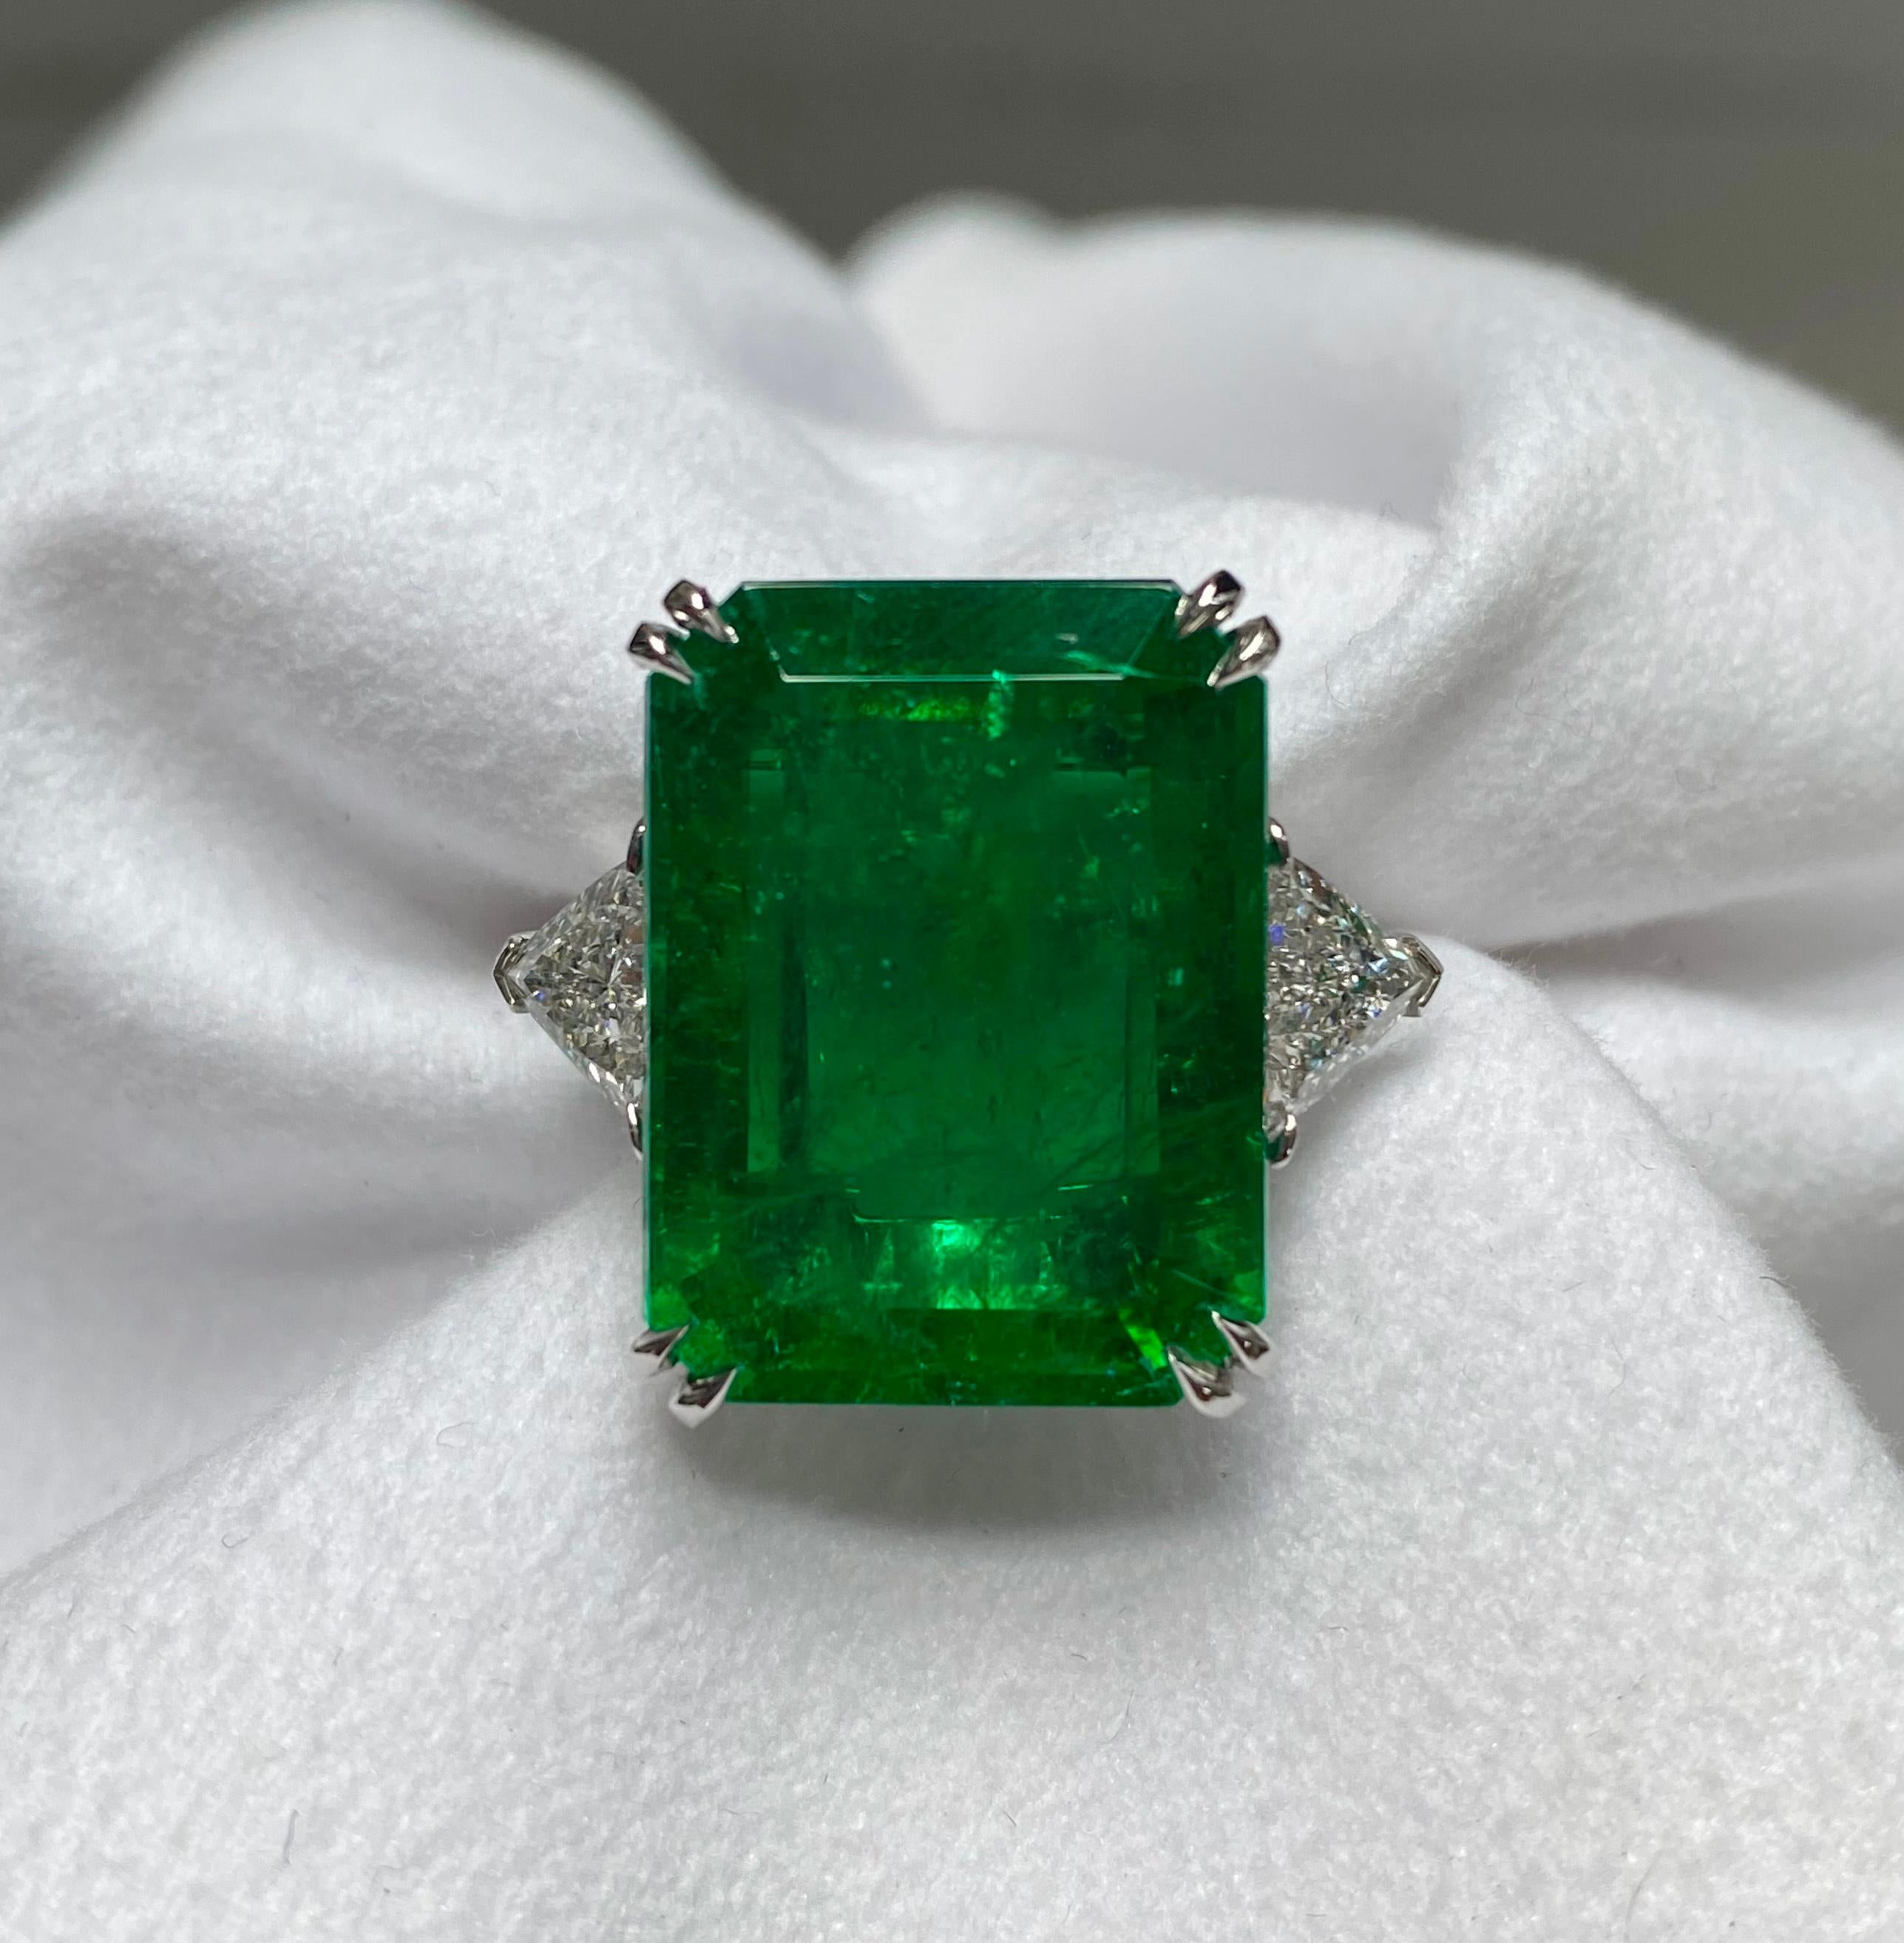 Emerald Weight: 17.45 Cts
Diamond Weight: 1.40 Cts
Metal: Platinum
Ring Size: 5.5 
Shape: Emeraldcut
Color: Green
Hardness: 7.5-8
Birthstone: May
CD Certified